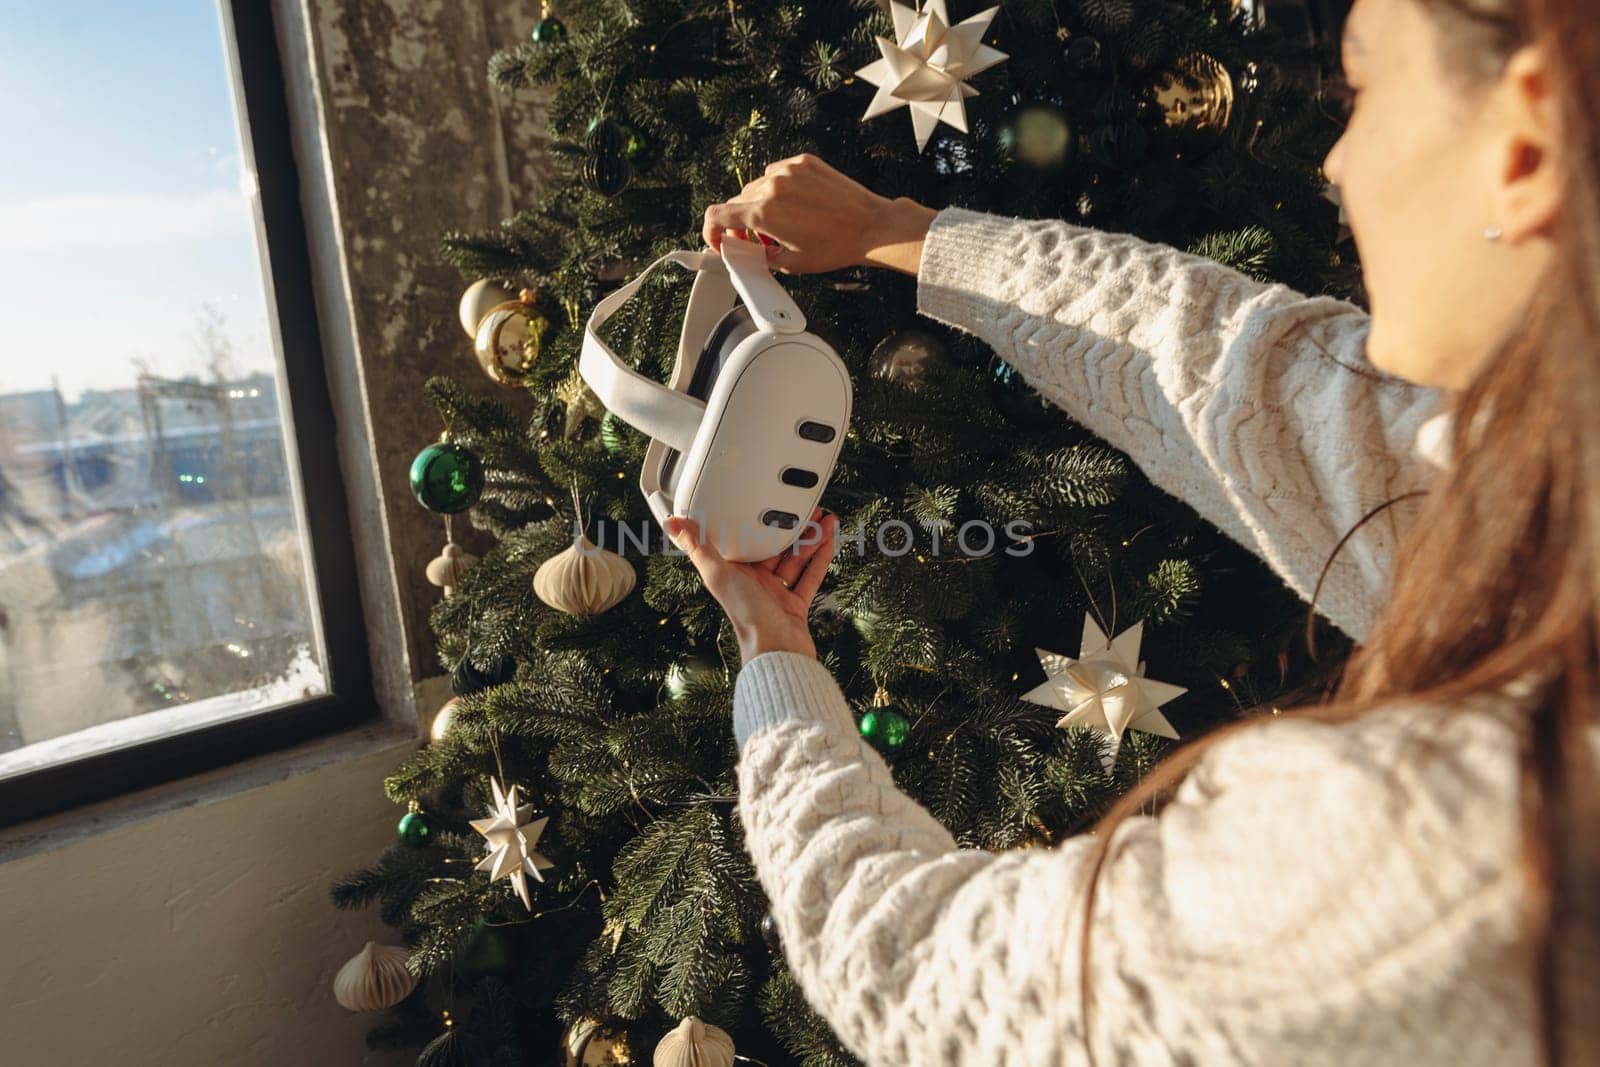 With a Christmas tree in the background, a girl is holding a virtual reality headset. by teksomolika